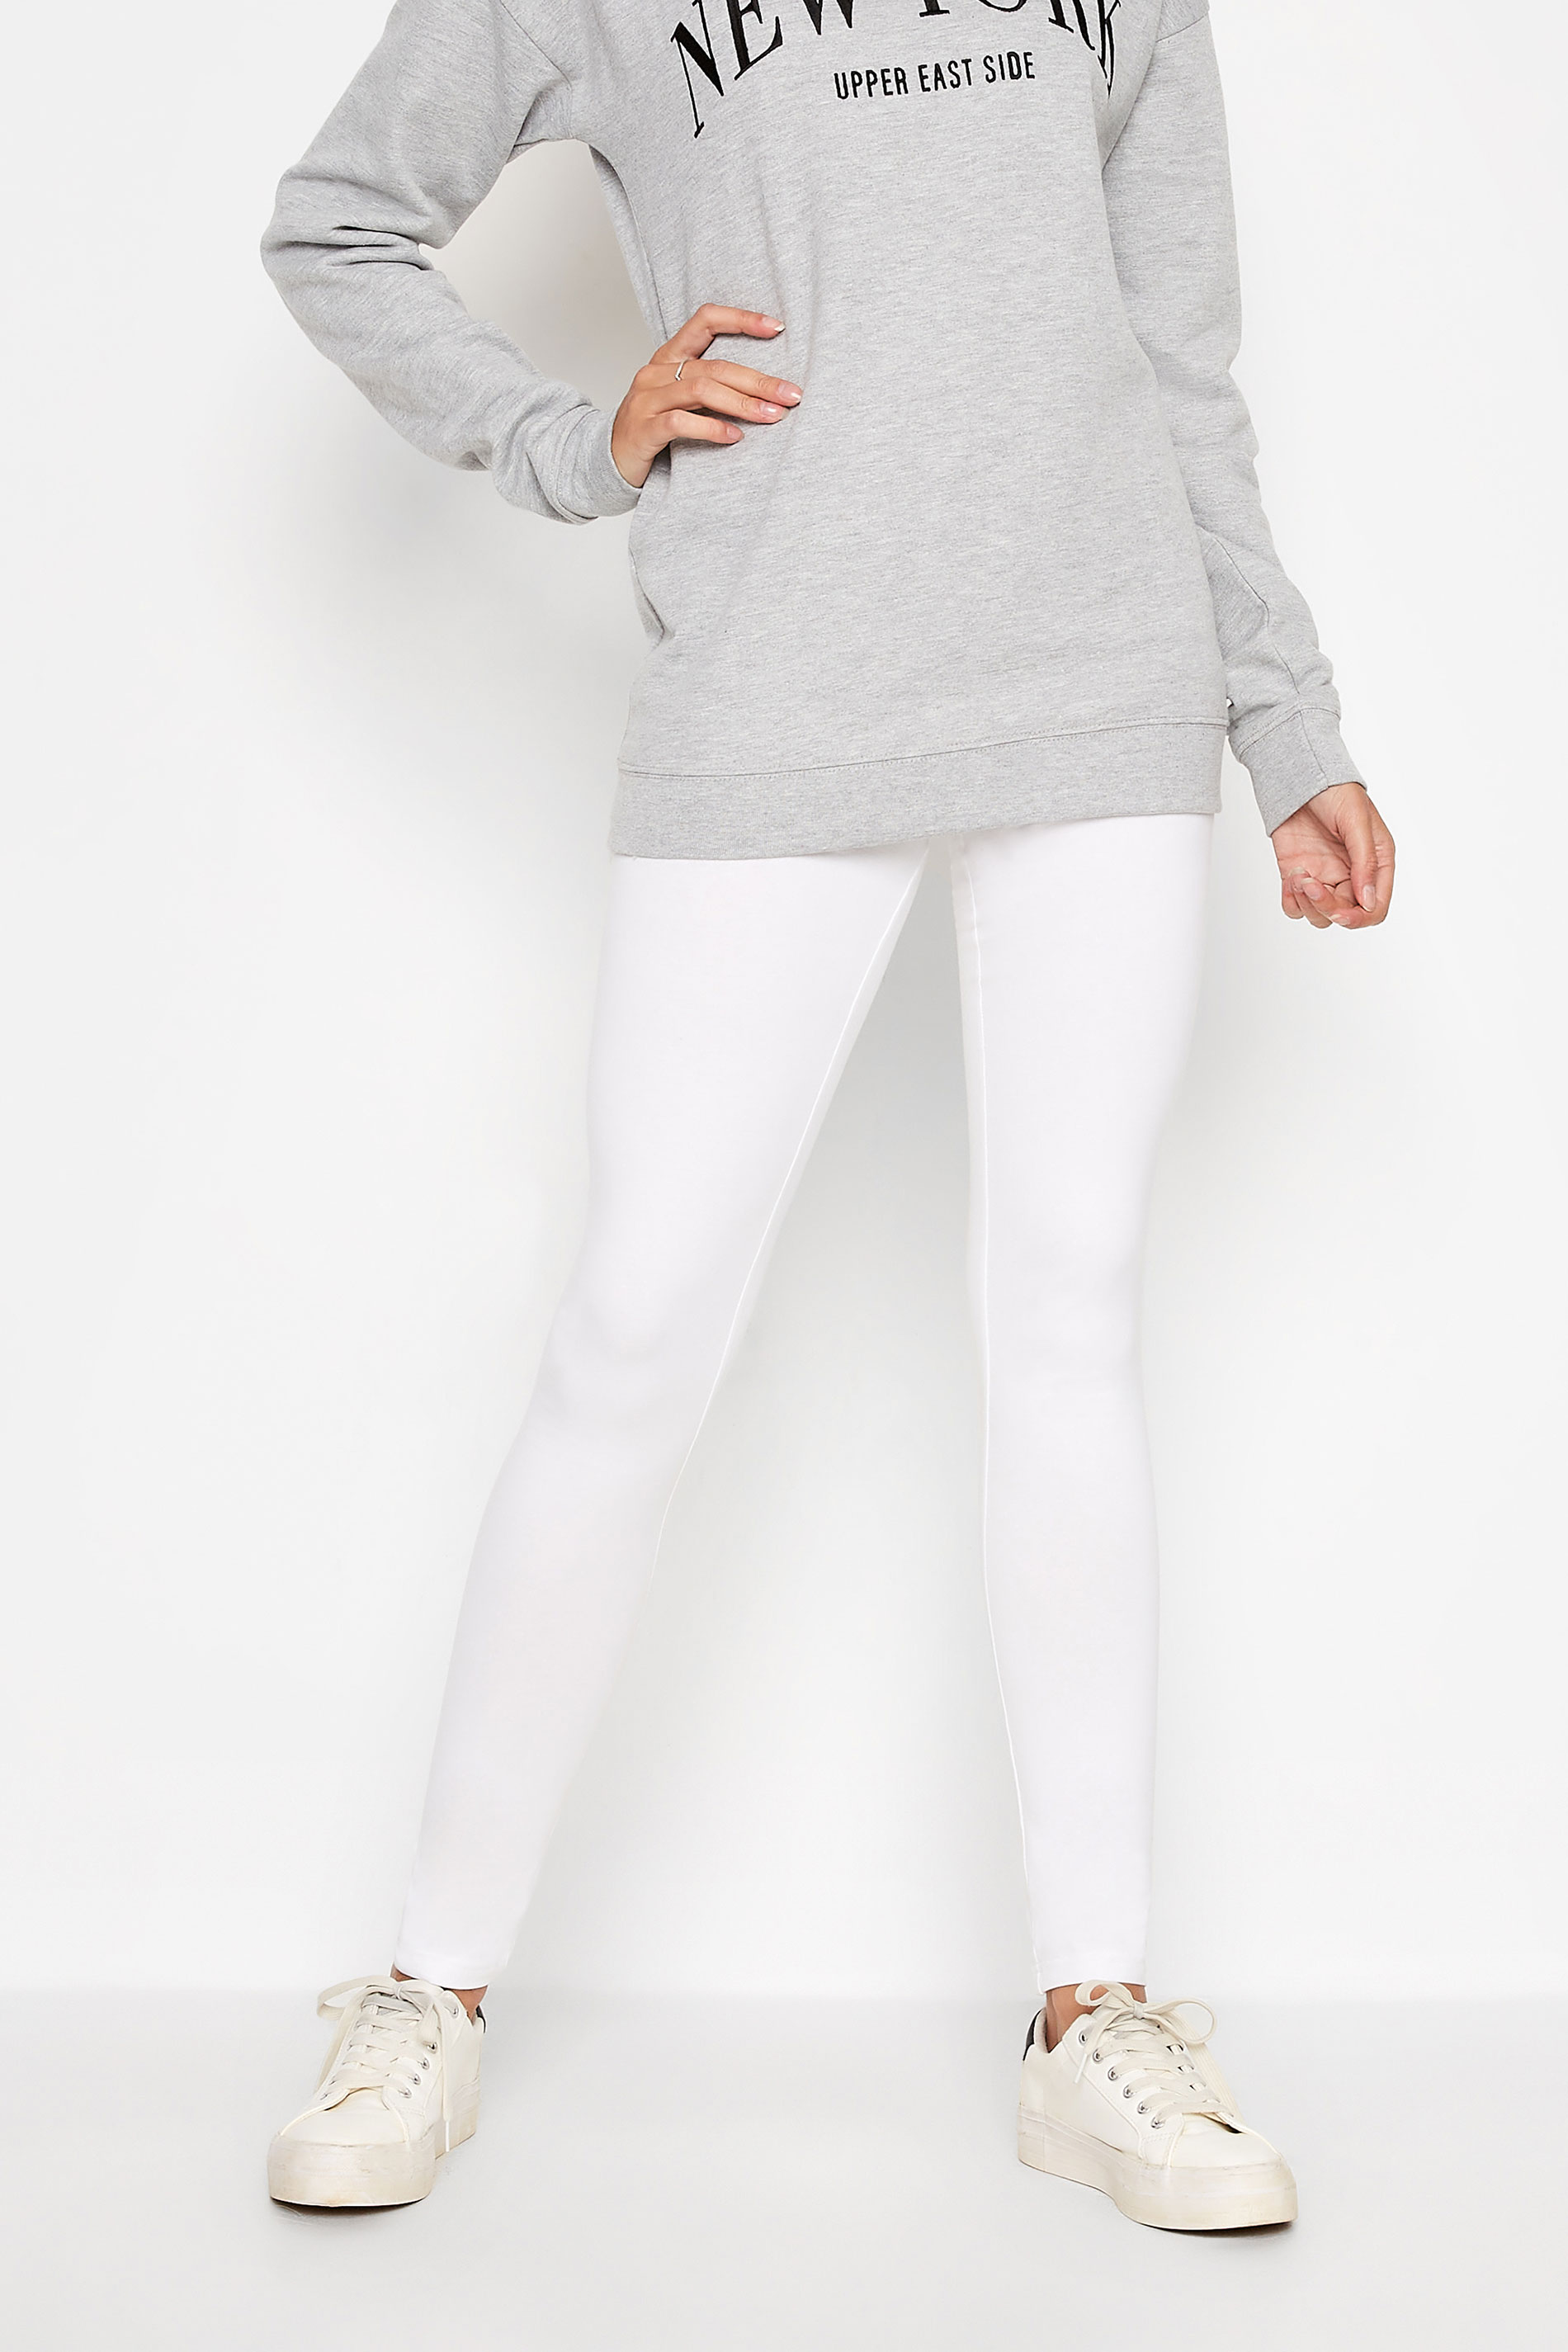 LTS MADE FOR GOOD White Organic Stretch Cotton Leggings